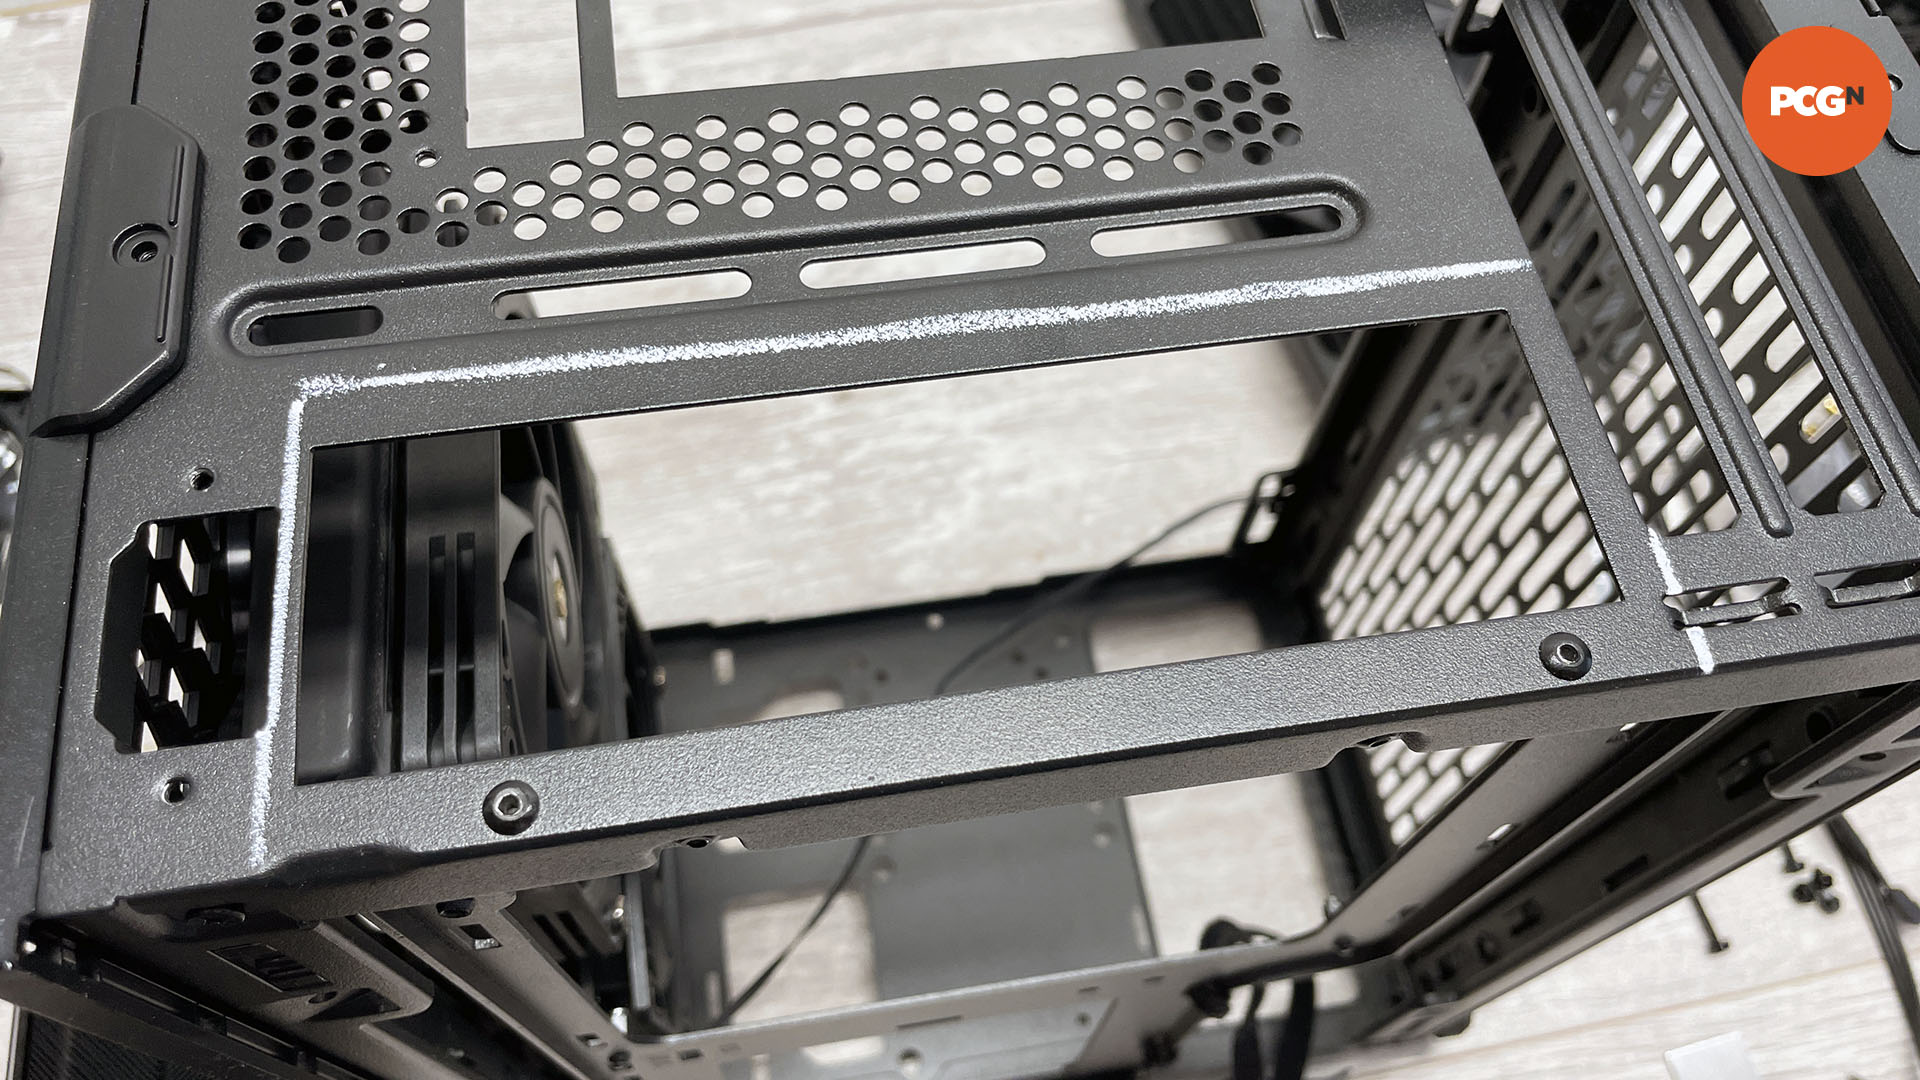 How to move the motherboard tray in your PC case: Work out new IO panel location